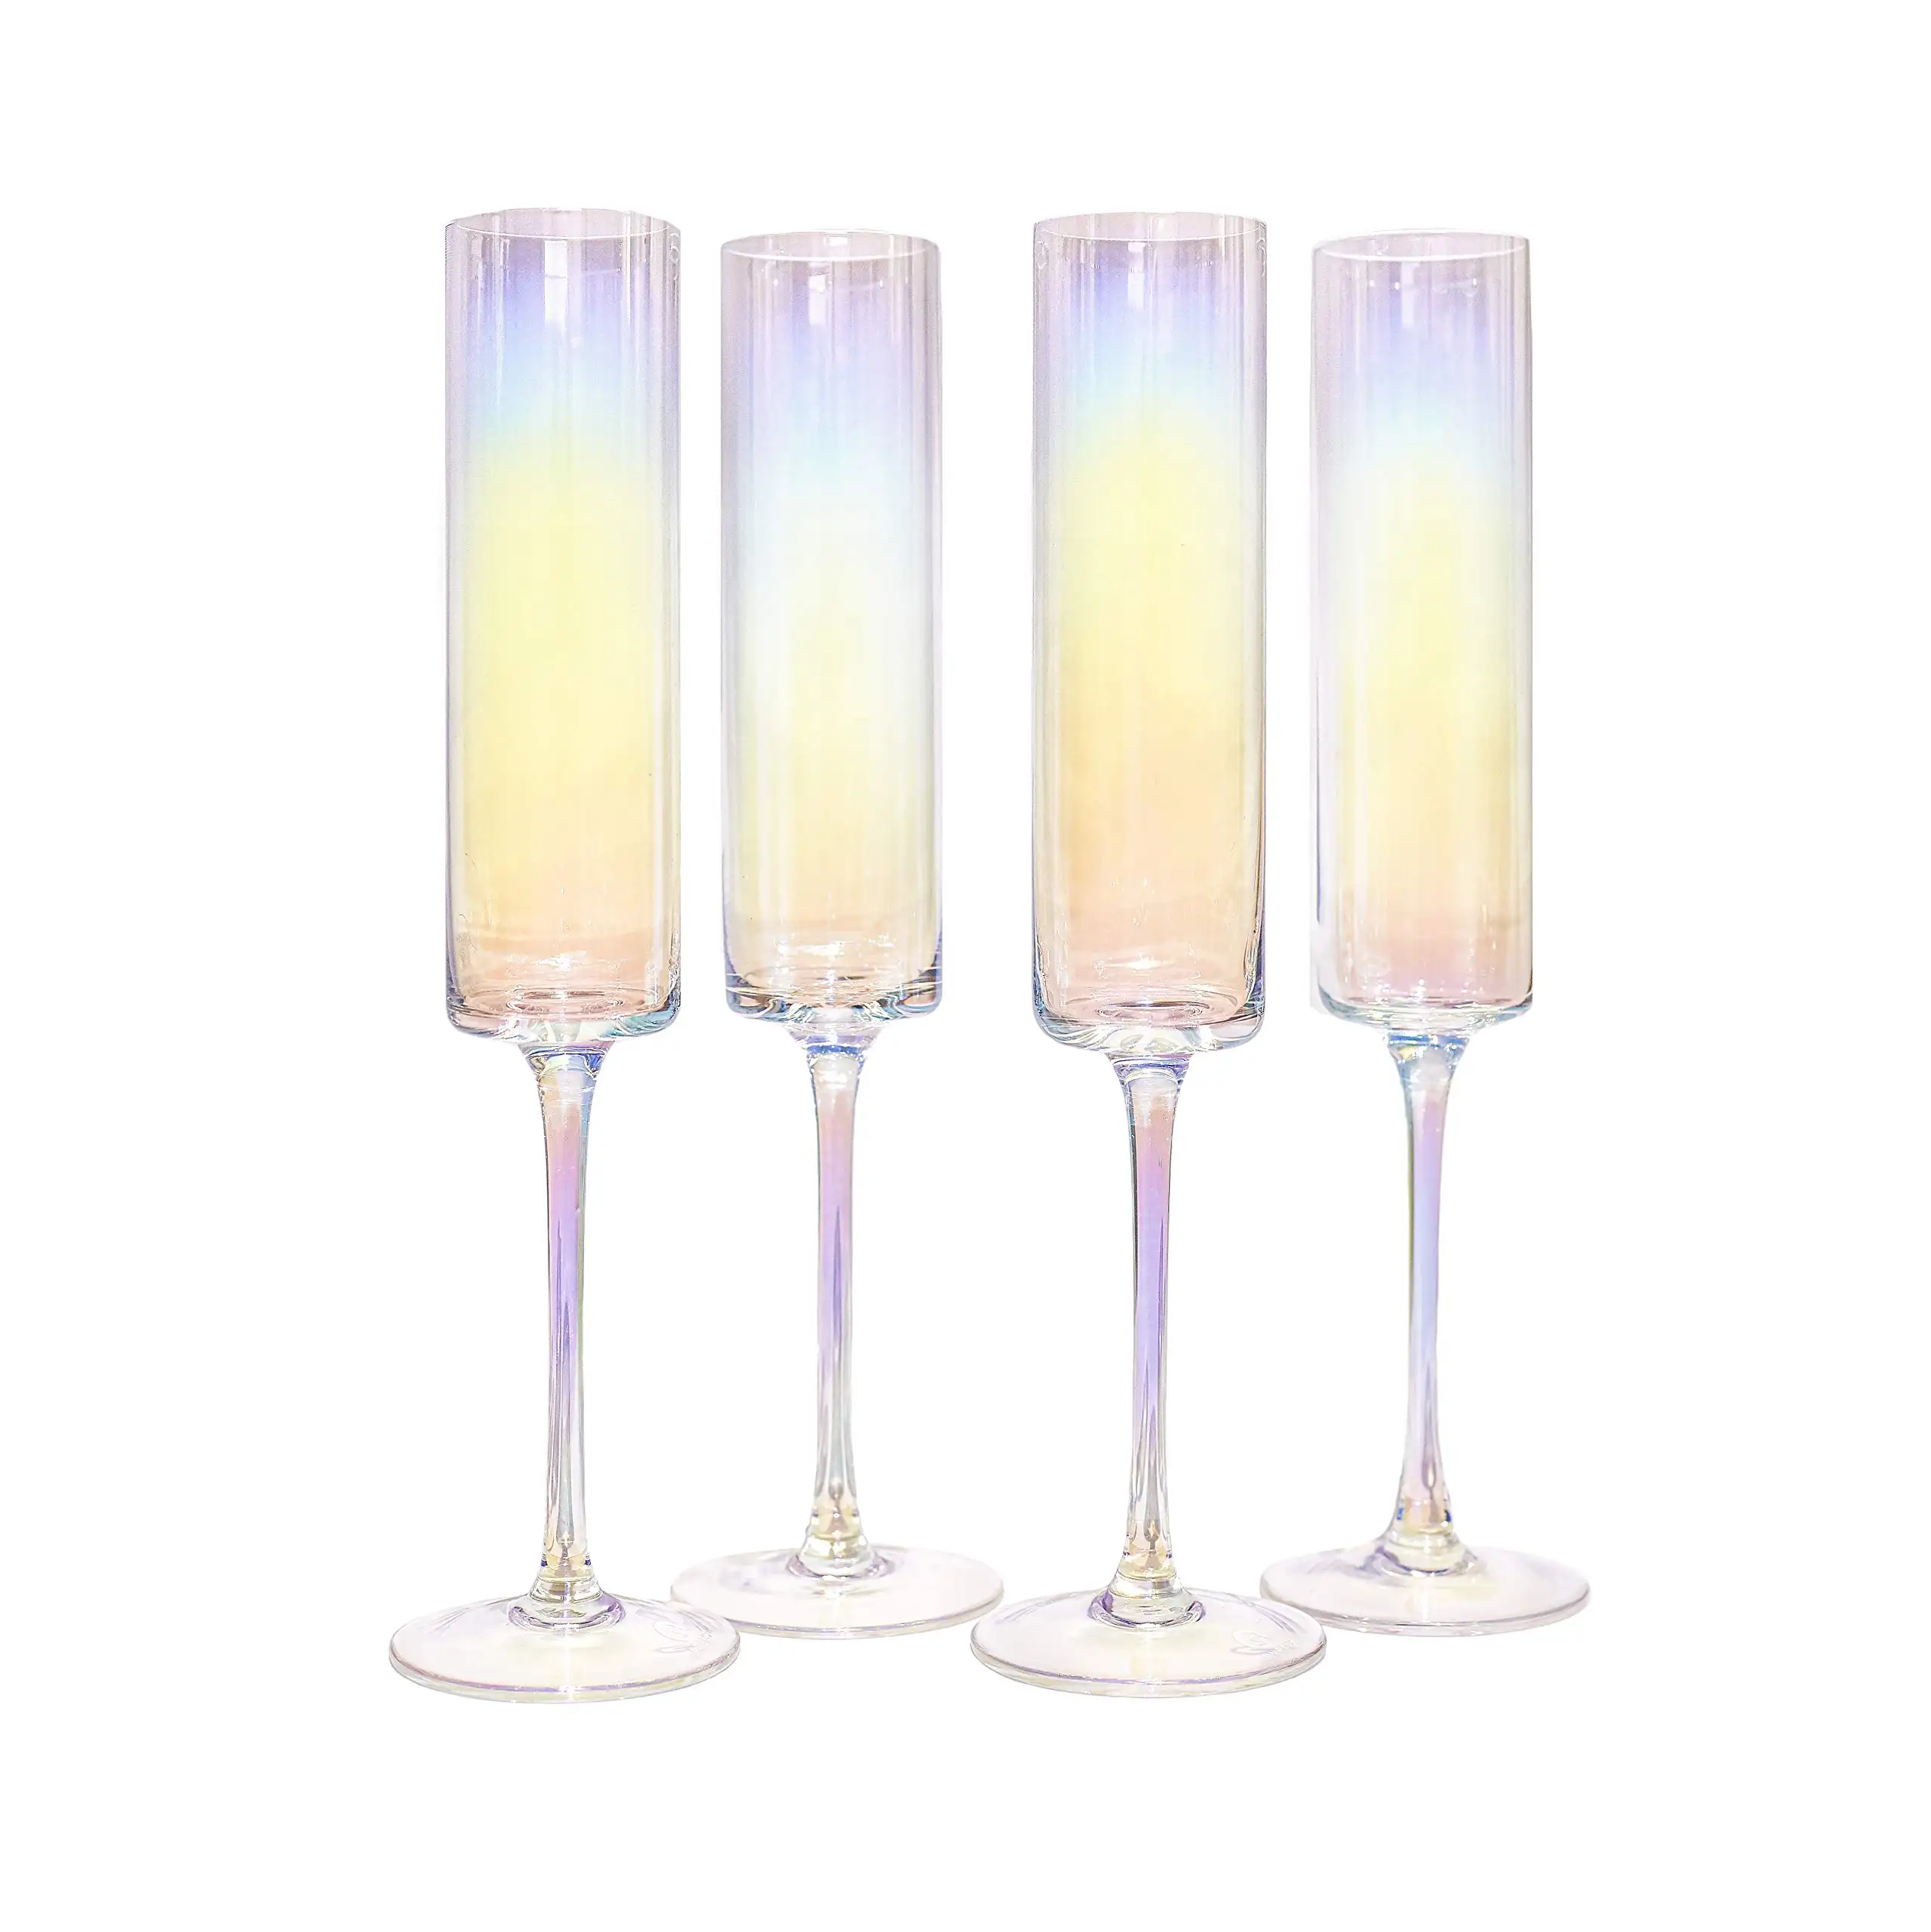 Promotional Price Stem Champagne Flutes Pearly Iridescent Tinge Champagne Glasses Crystal Cup Champagne Flute Wine Glass